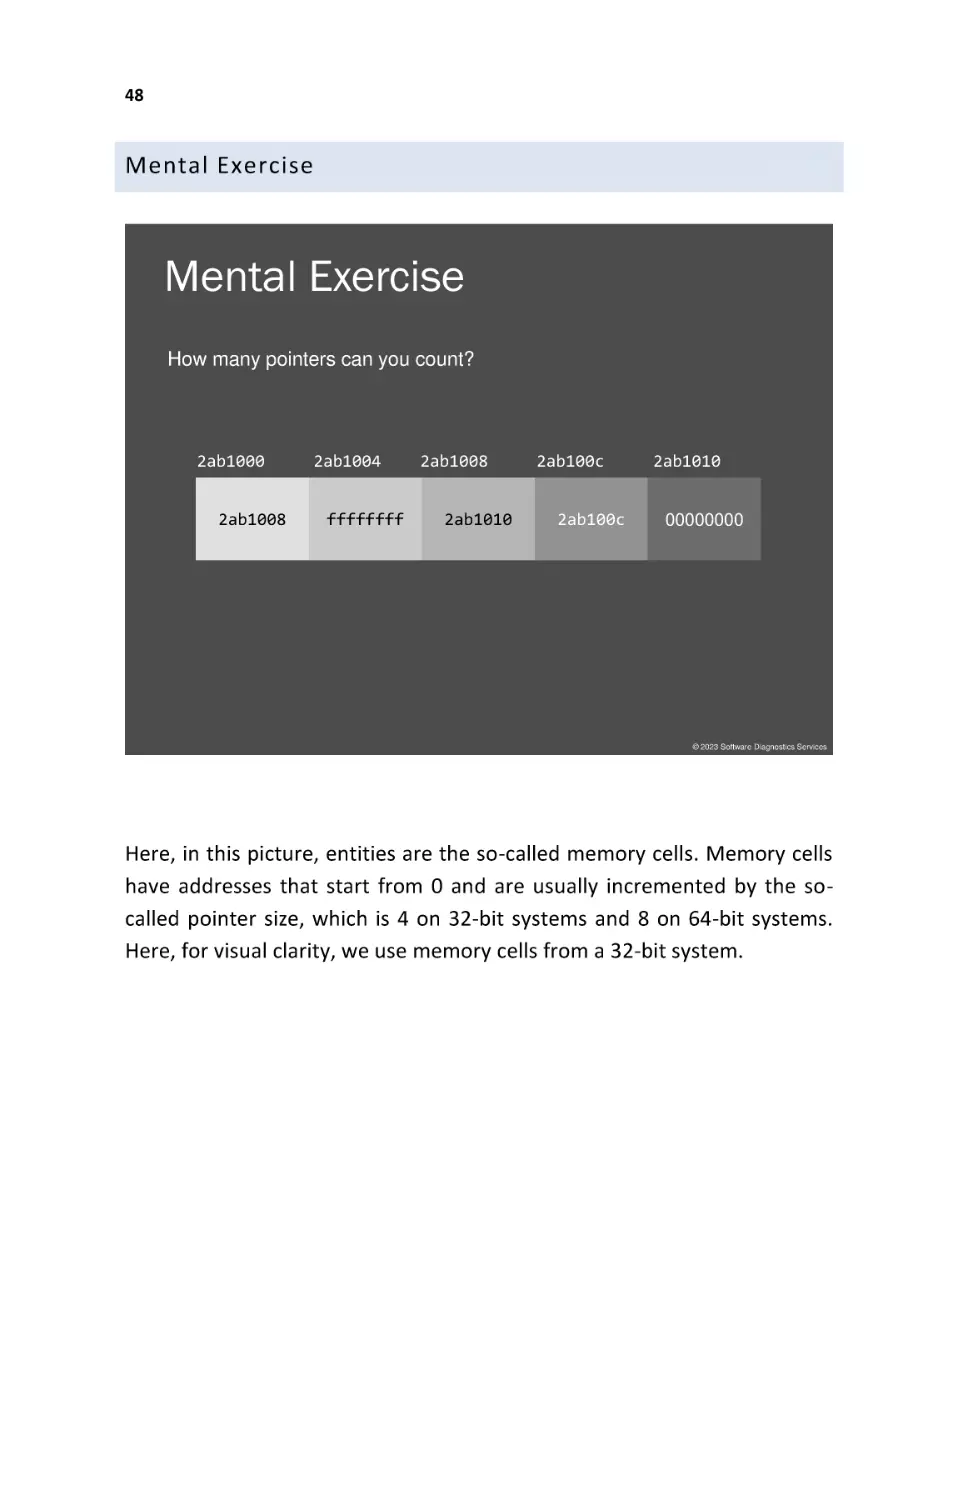 Mental Exercise